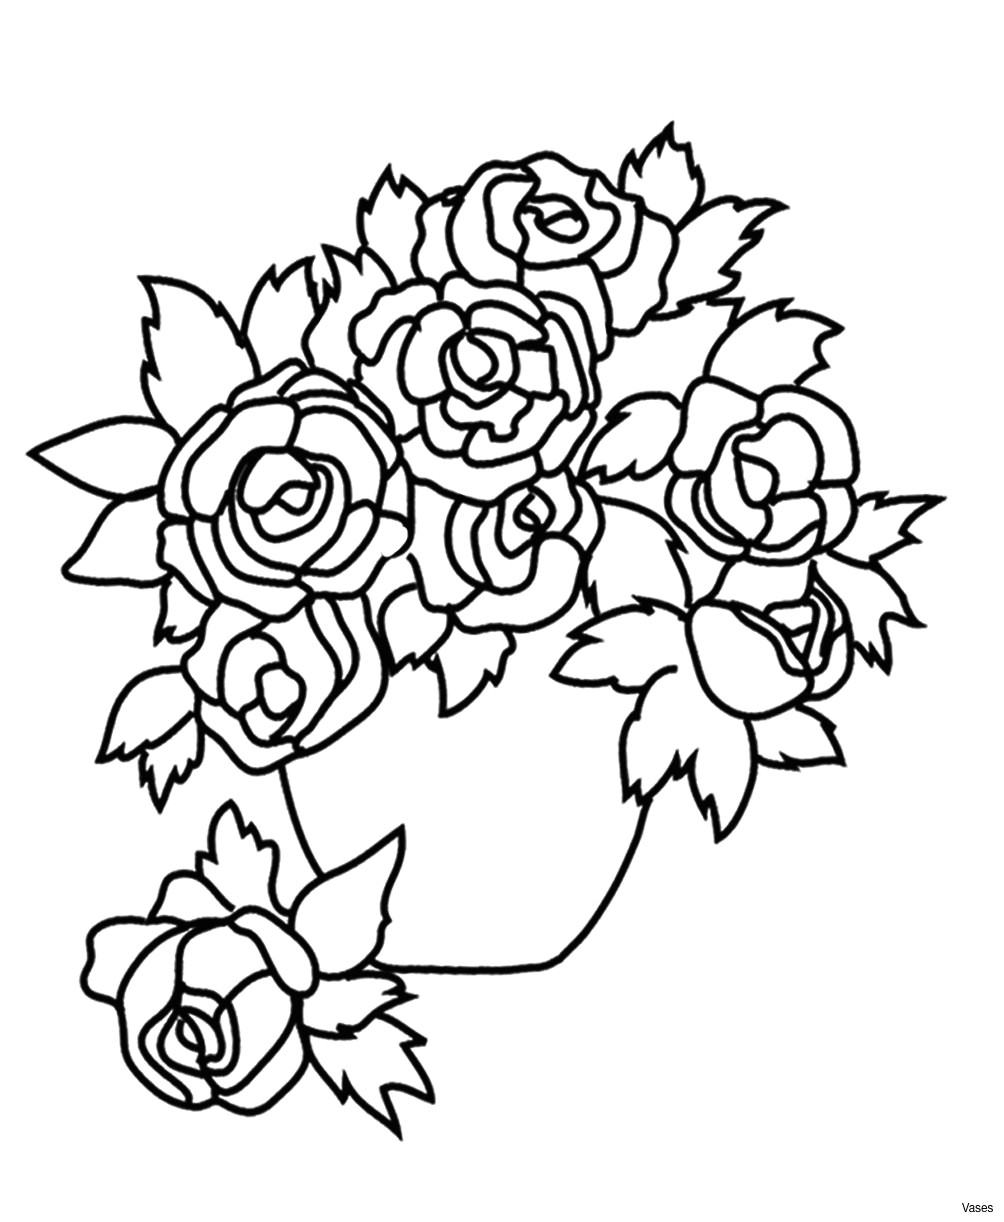 Drawings Of Flowers and Vases Flower Coloring Pages for Adults New Cool Vases Flower Vase Coloring